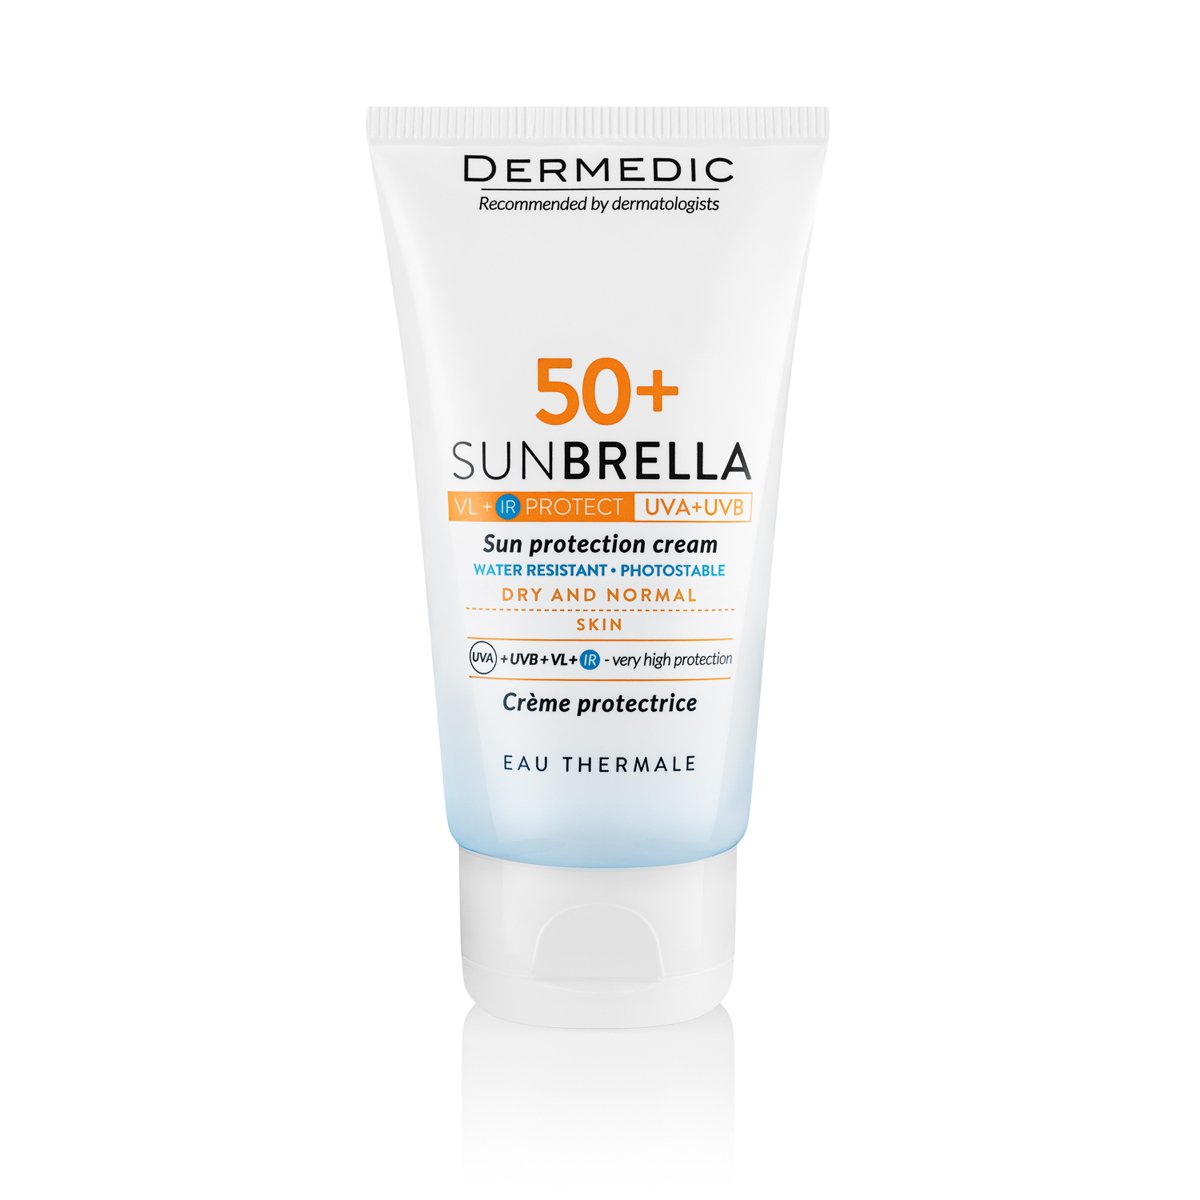 SUN PROTECTION CREAM SPF 50+DRY AND NORMAL SKIN